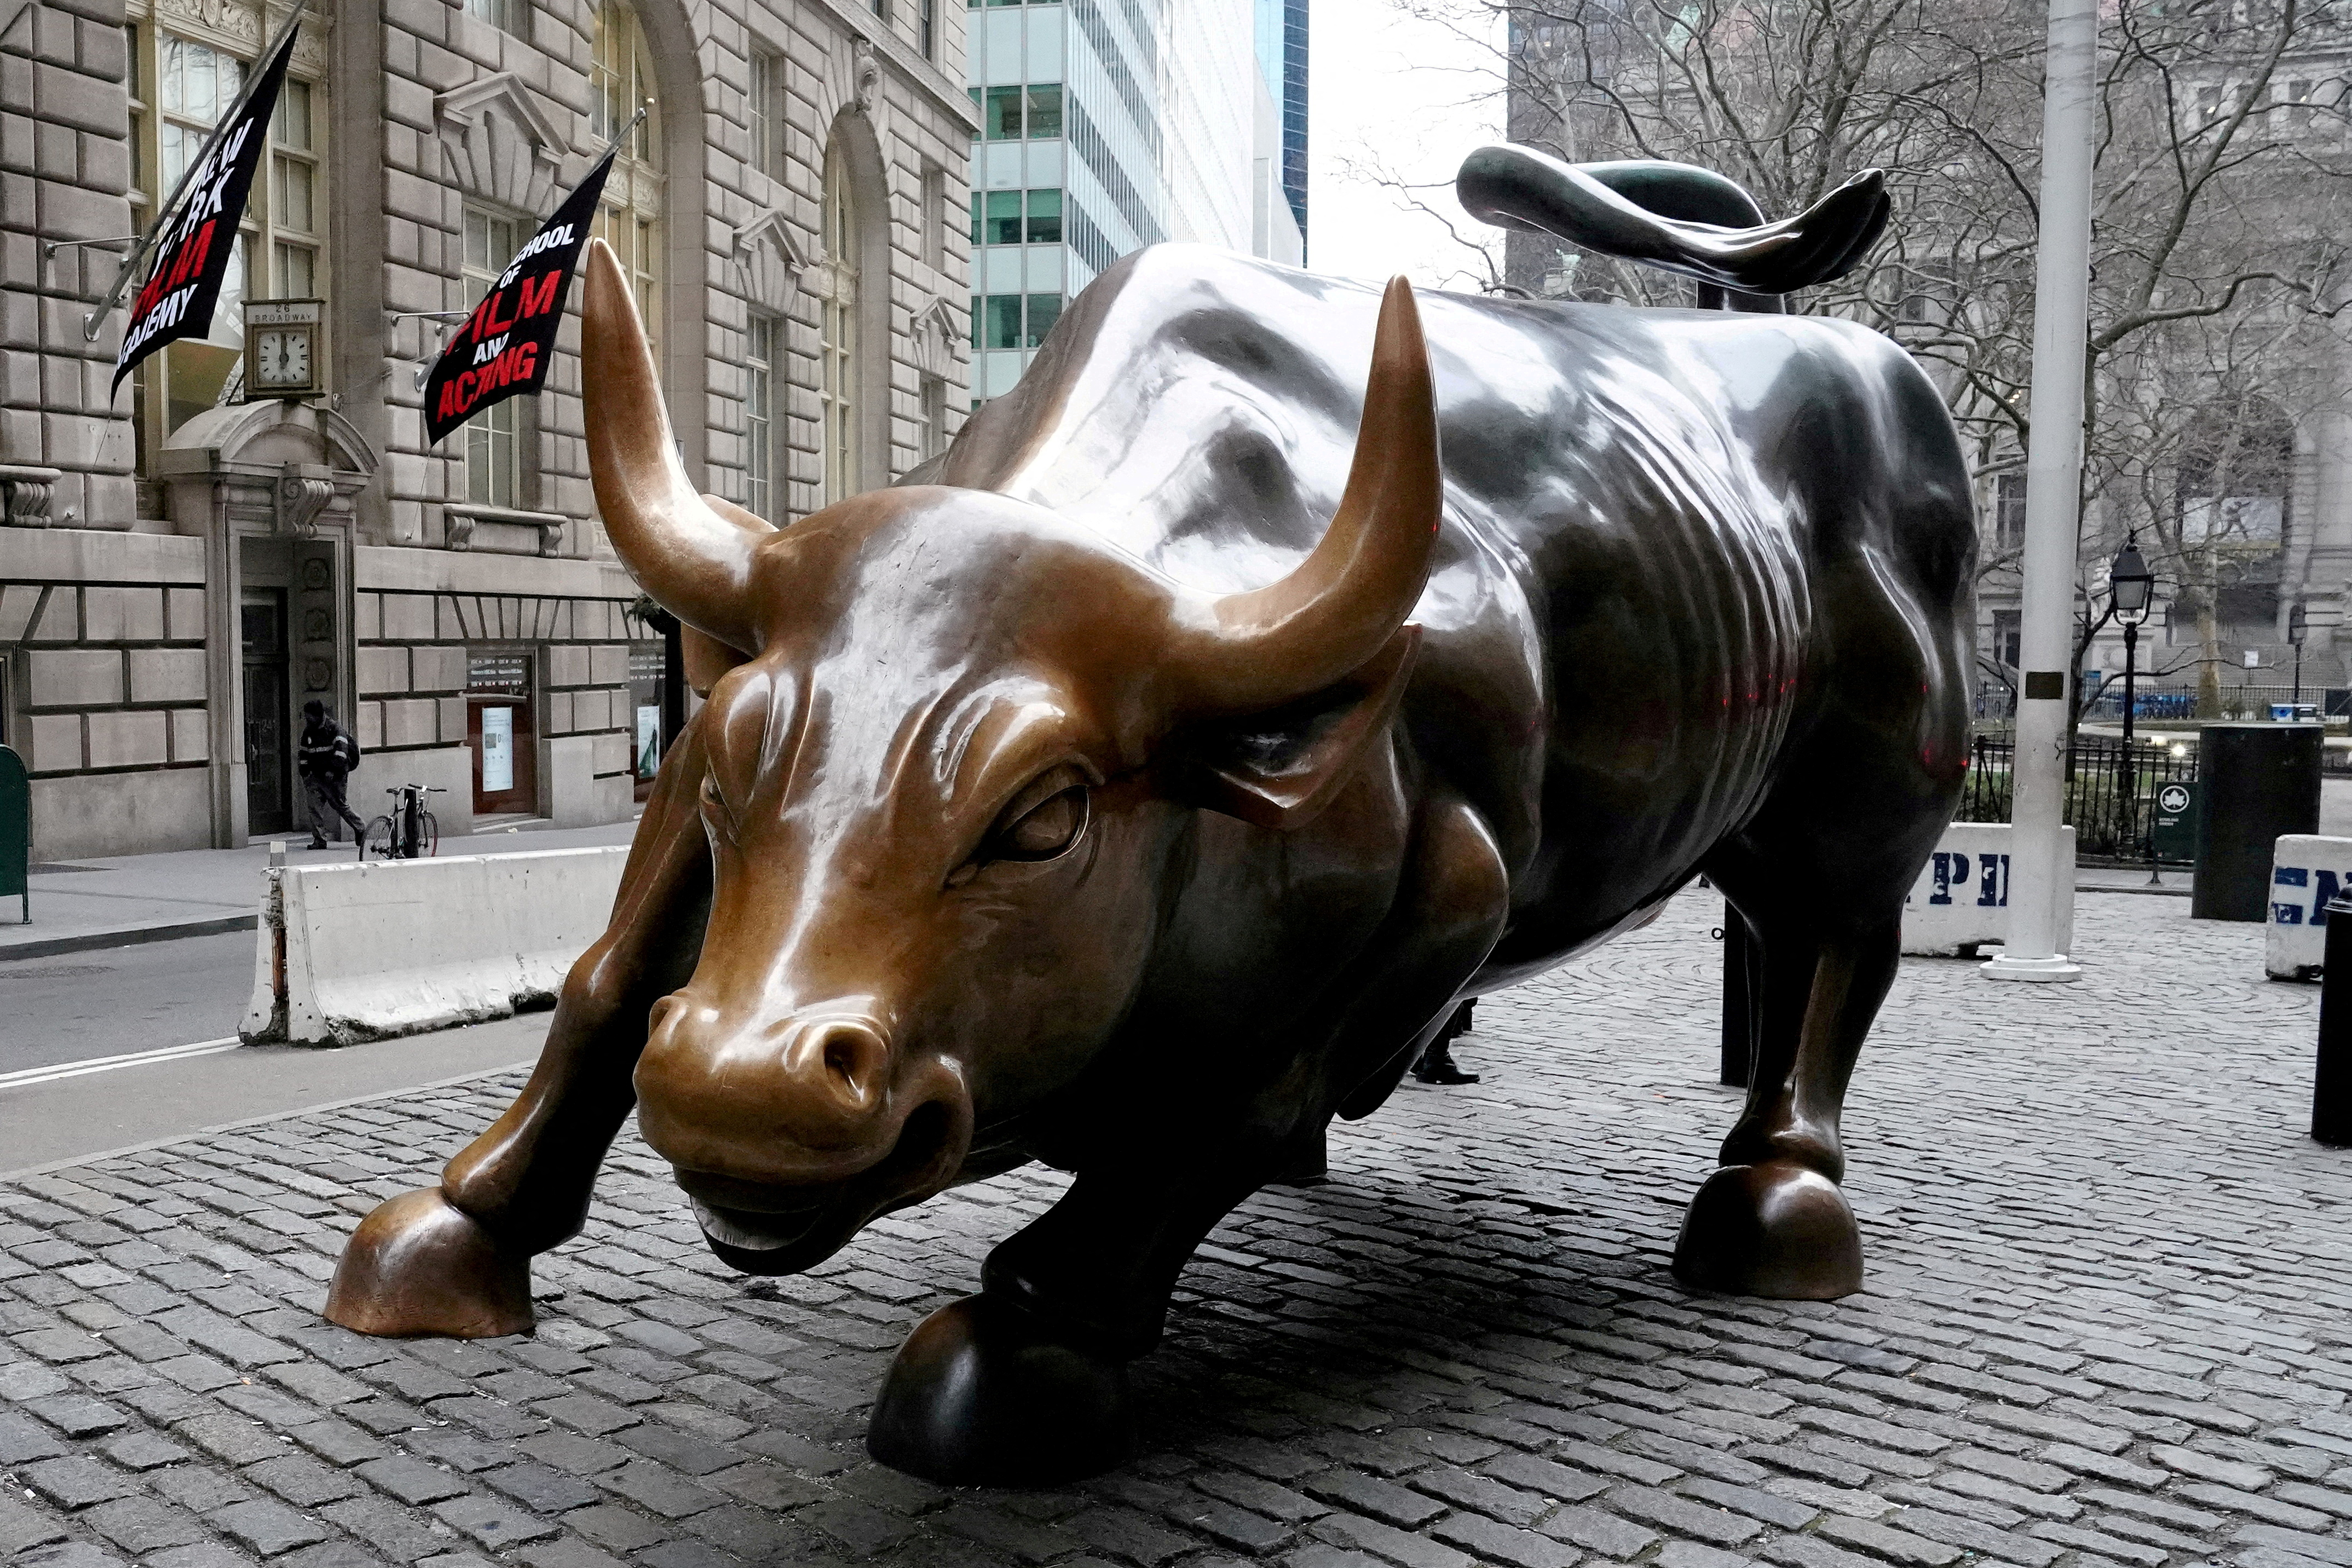 The Charging Bull or Wall Street Bull is pictured in Manhattan, New York City